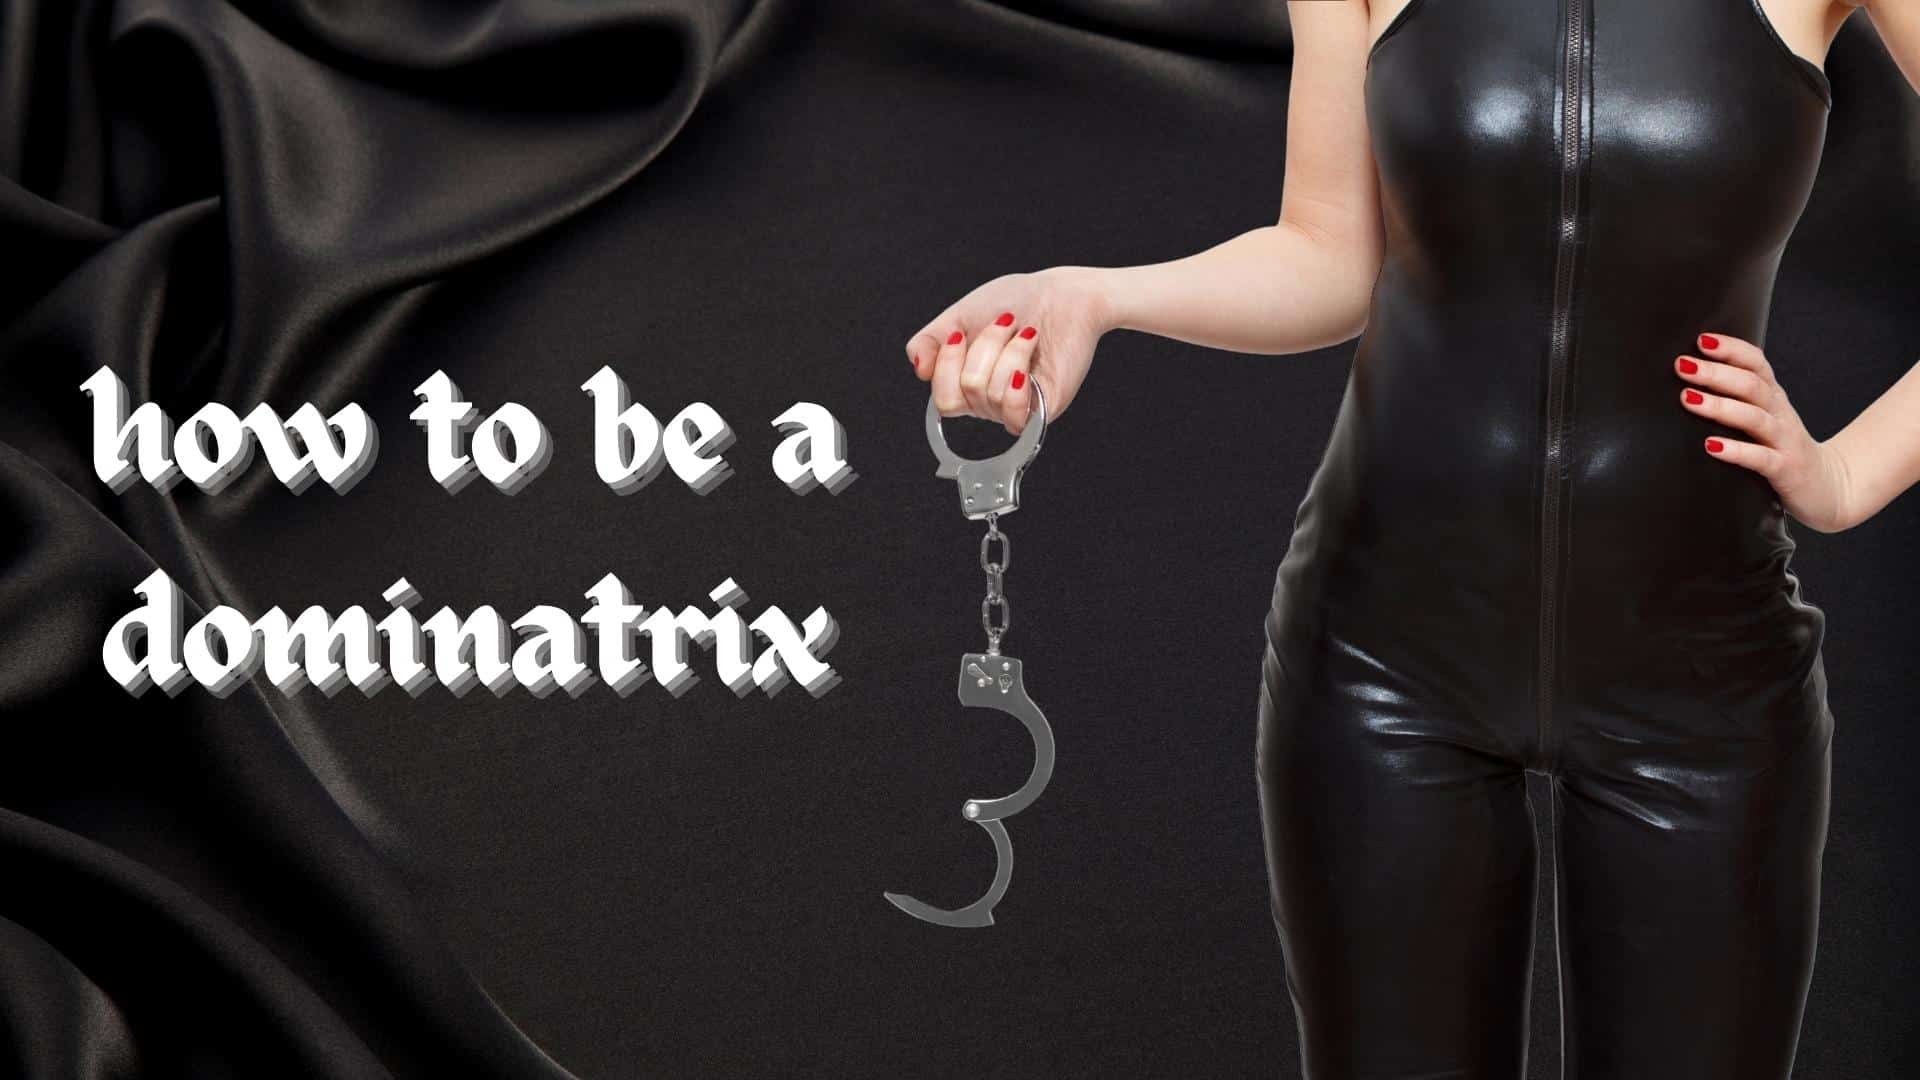 How to Be a Dominatrix: The Ultimate Bedroom Guide